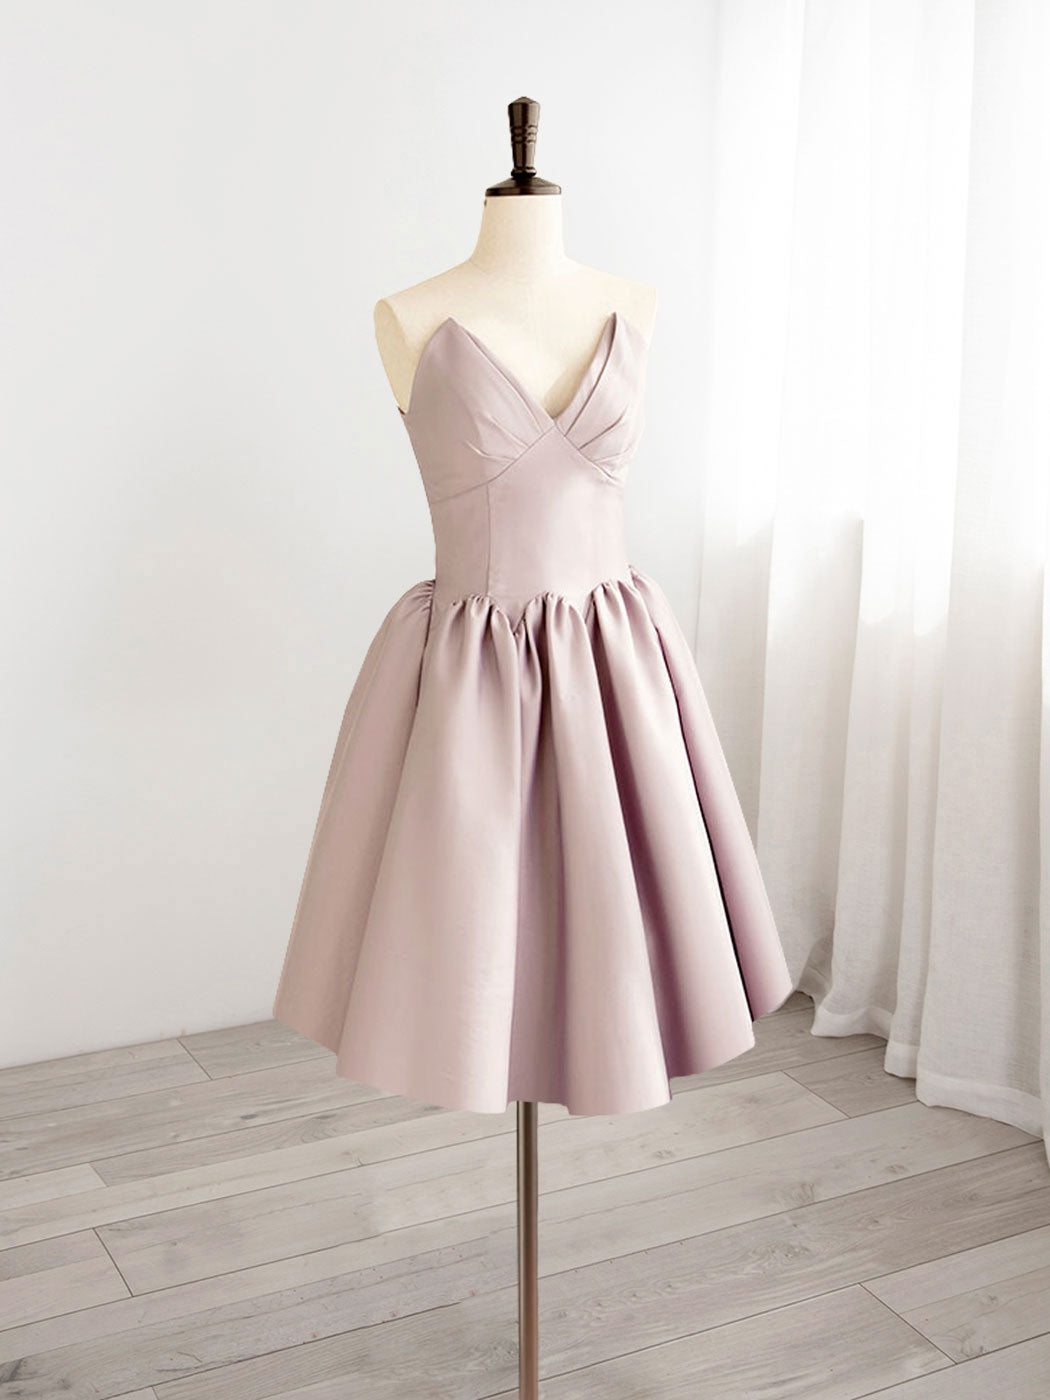 A-Line V Neck Pink Short Prom Dress Outfits For Girls, Pink Homecoming Dresses